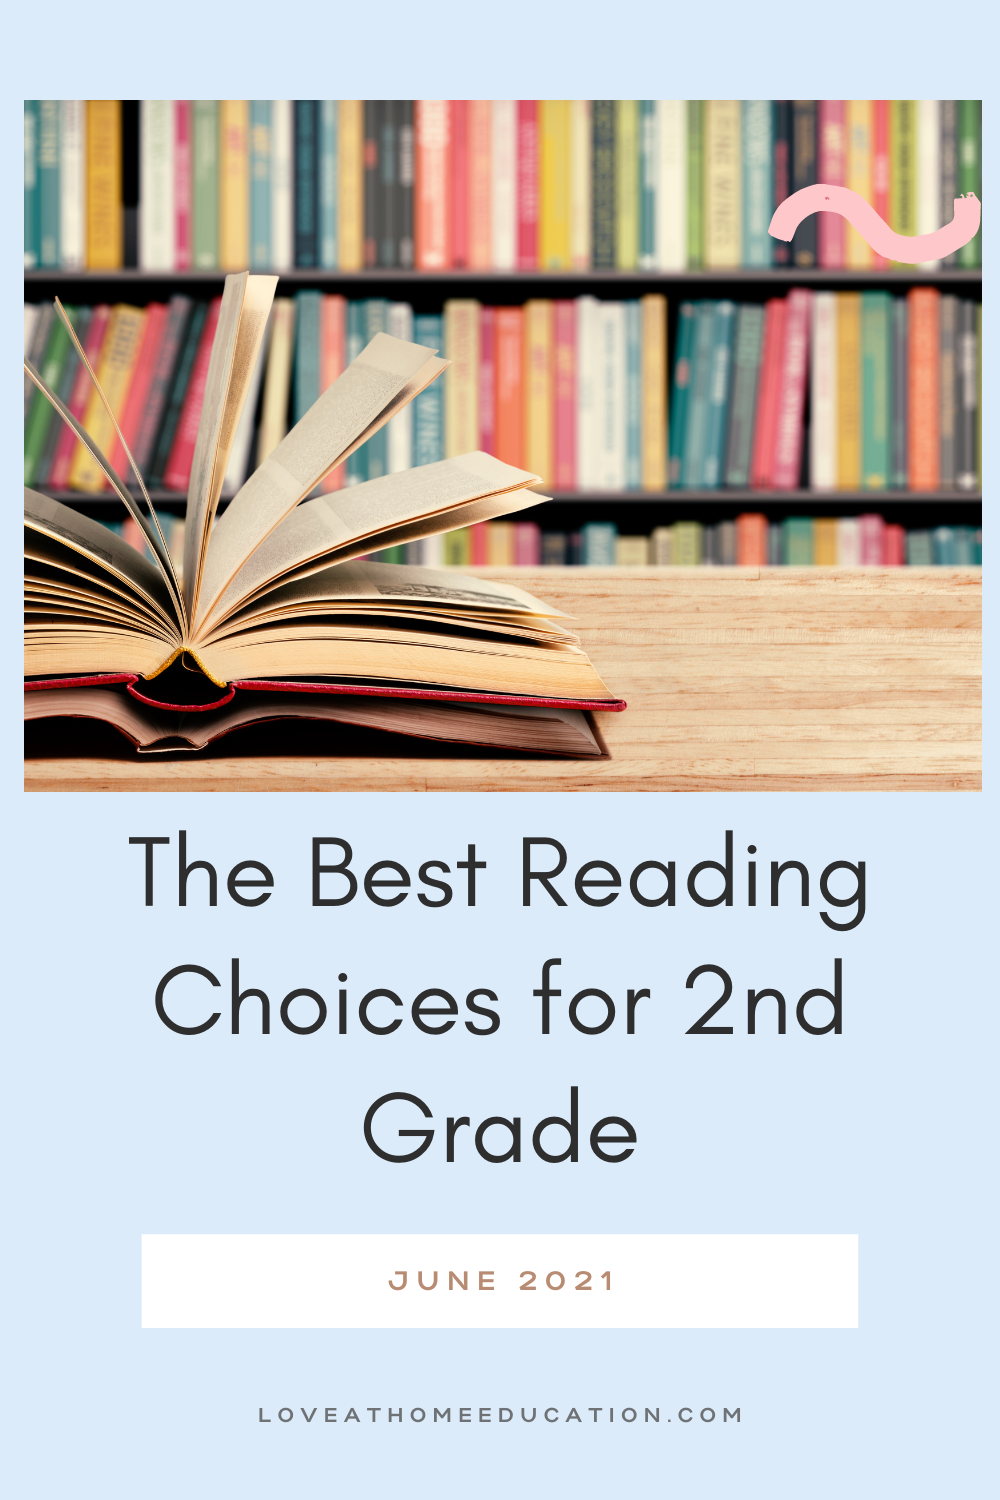 Our 2nd Grade Reading Picks (Best Books for 2nd Graders to Read!)